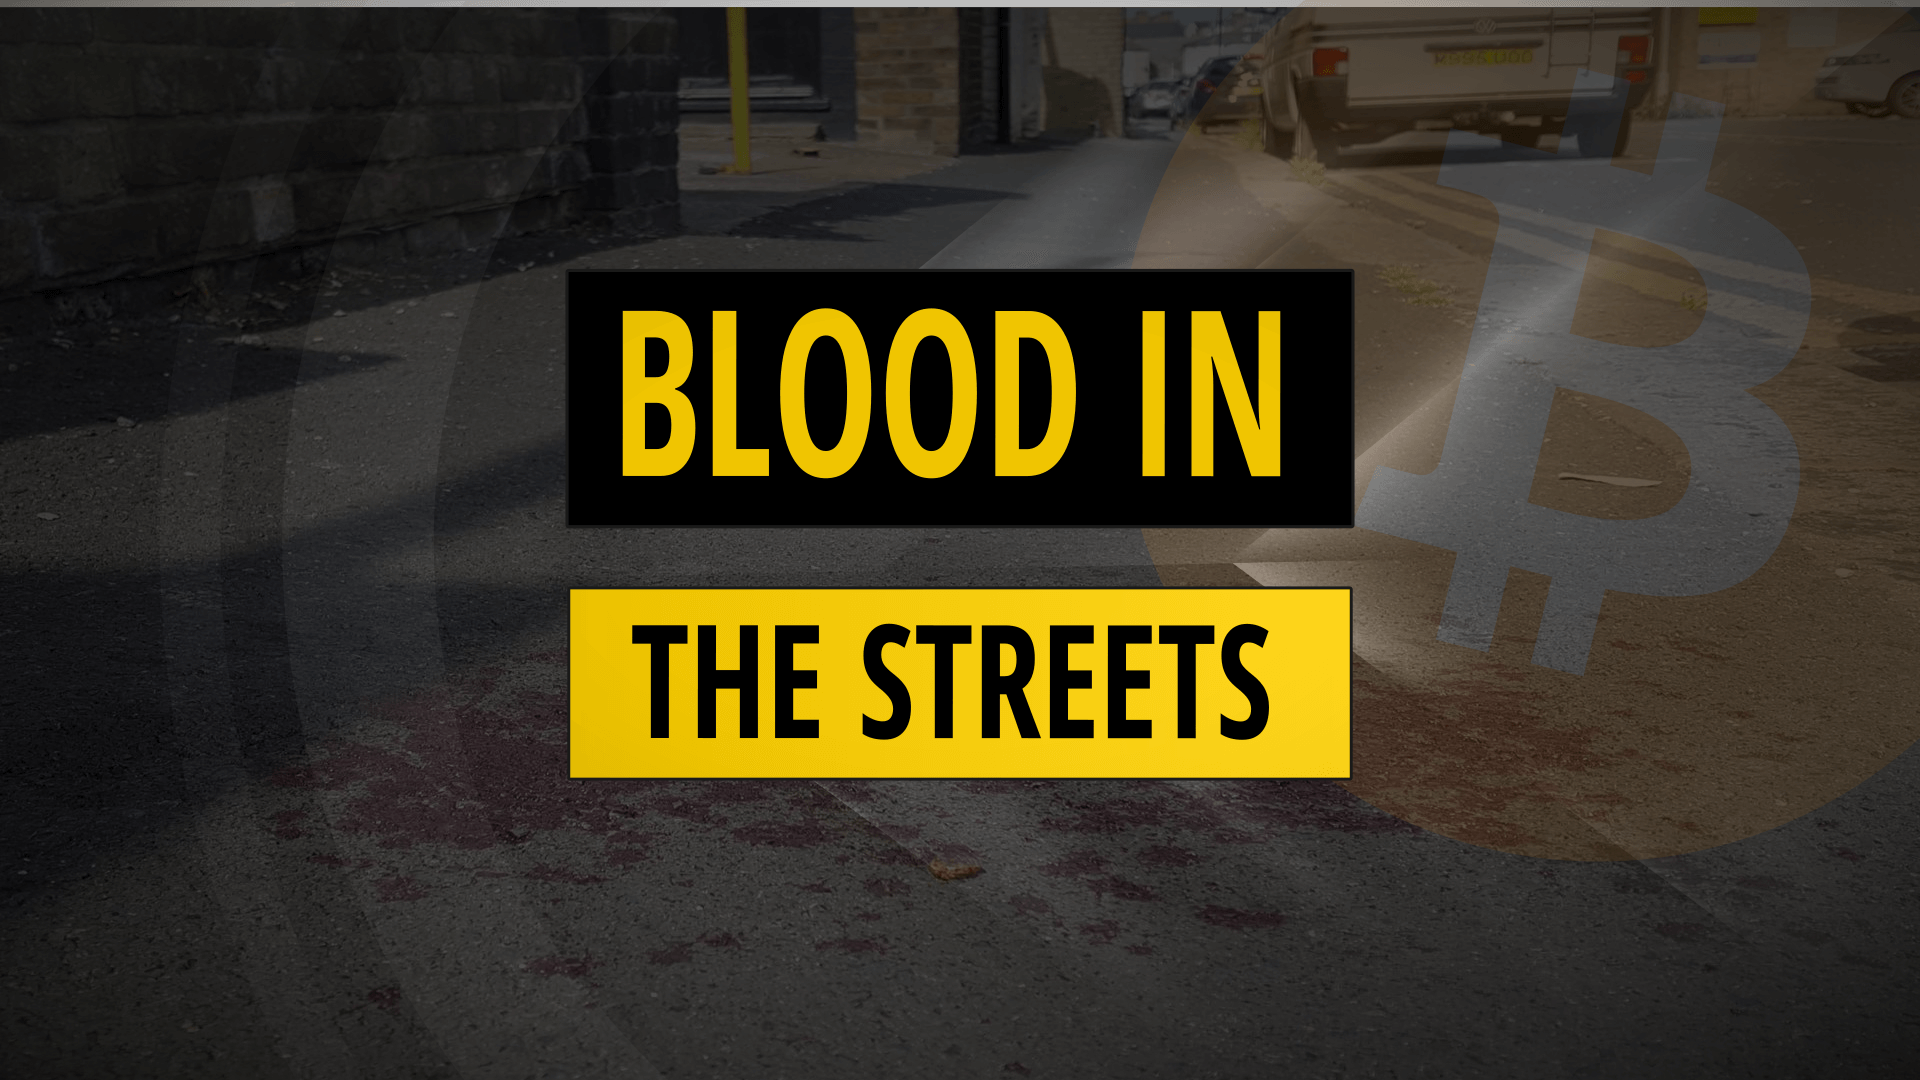 Blood in the streets for crypto markets